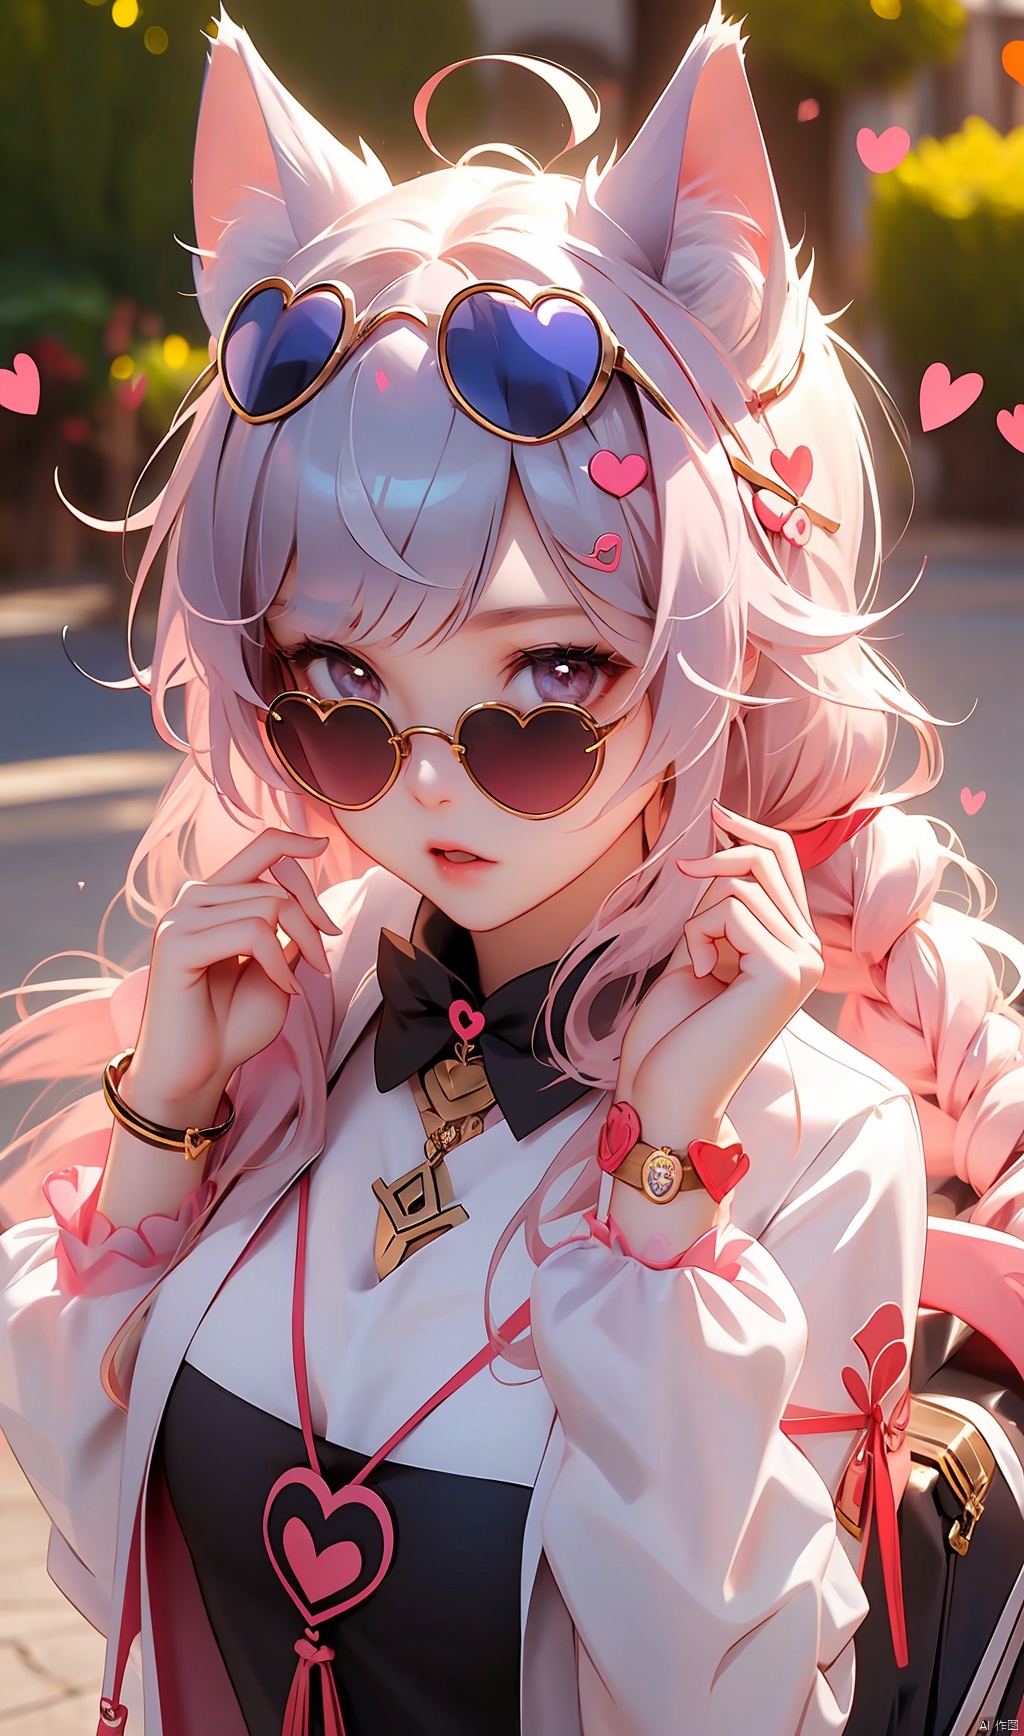  girl only,student,cool ,asian,pretty,cute,
mystical,magical,heart-shaped 1sunglass,cat ears only, Animal ear